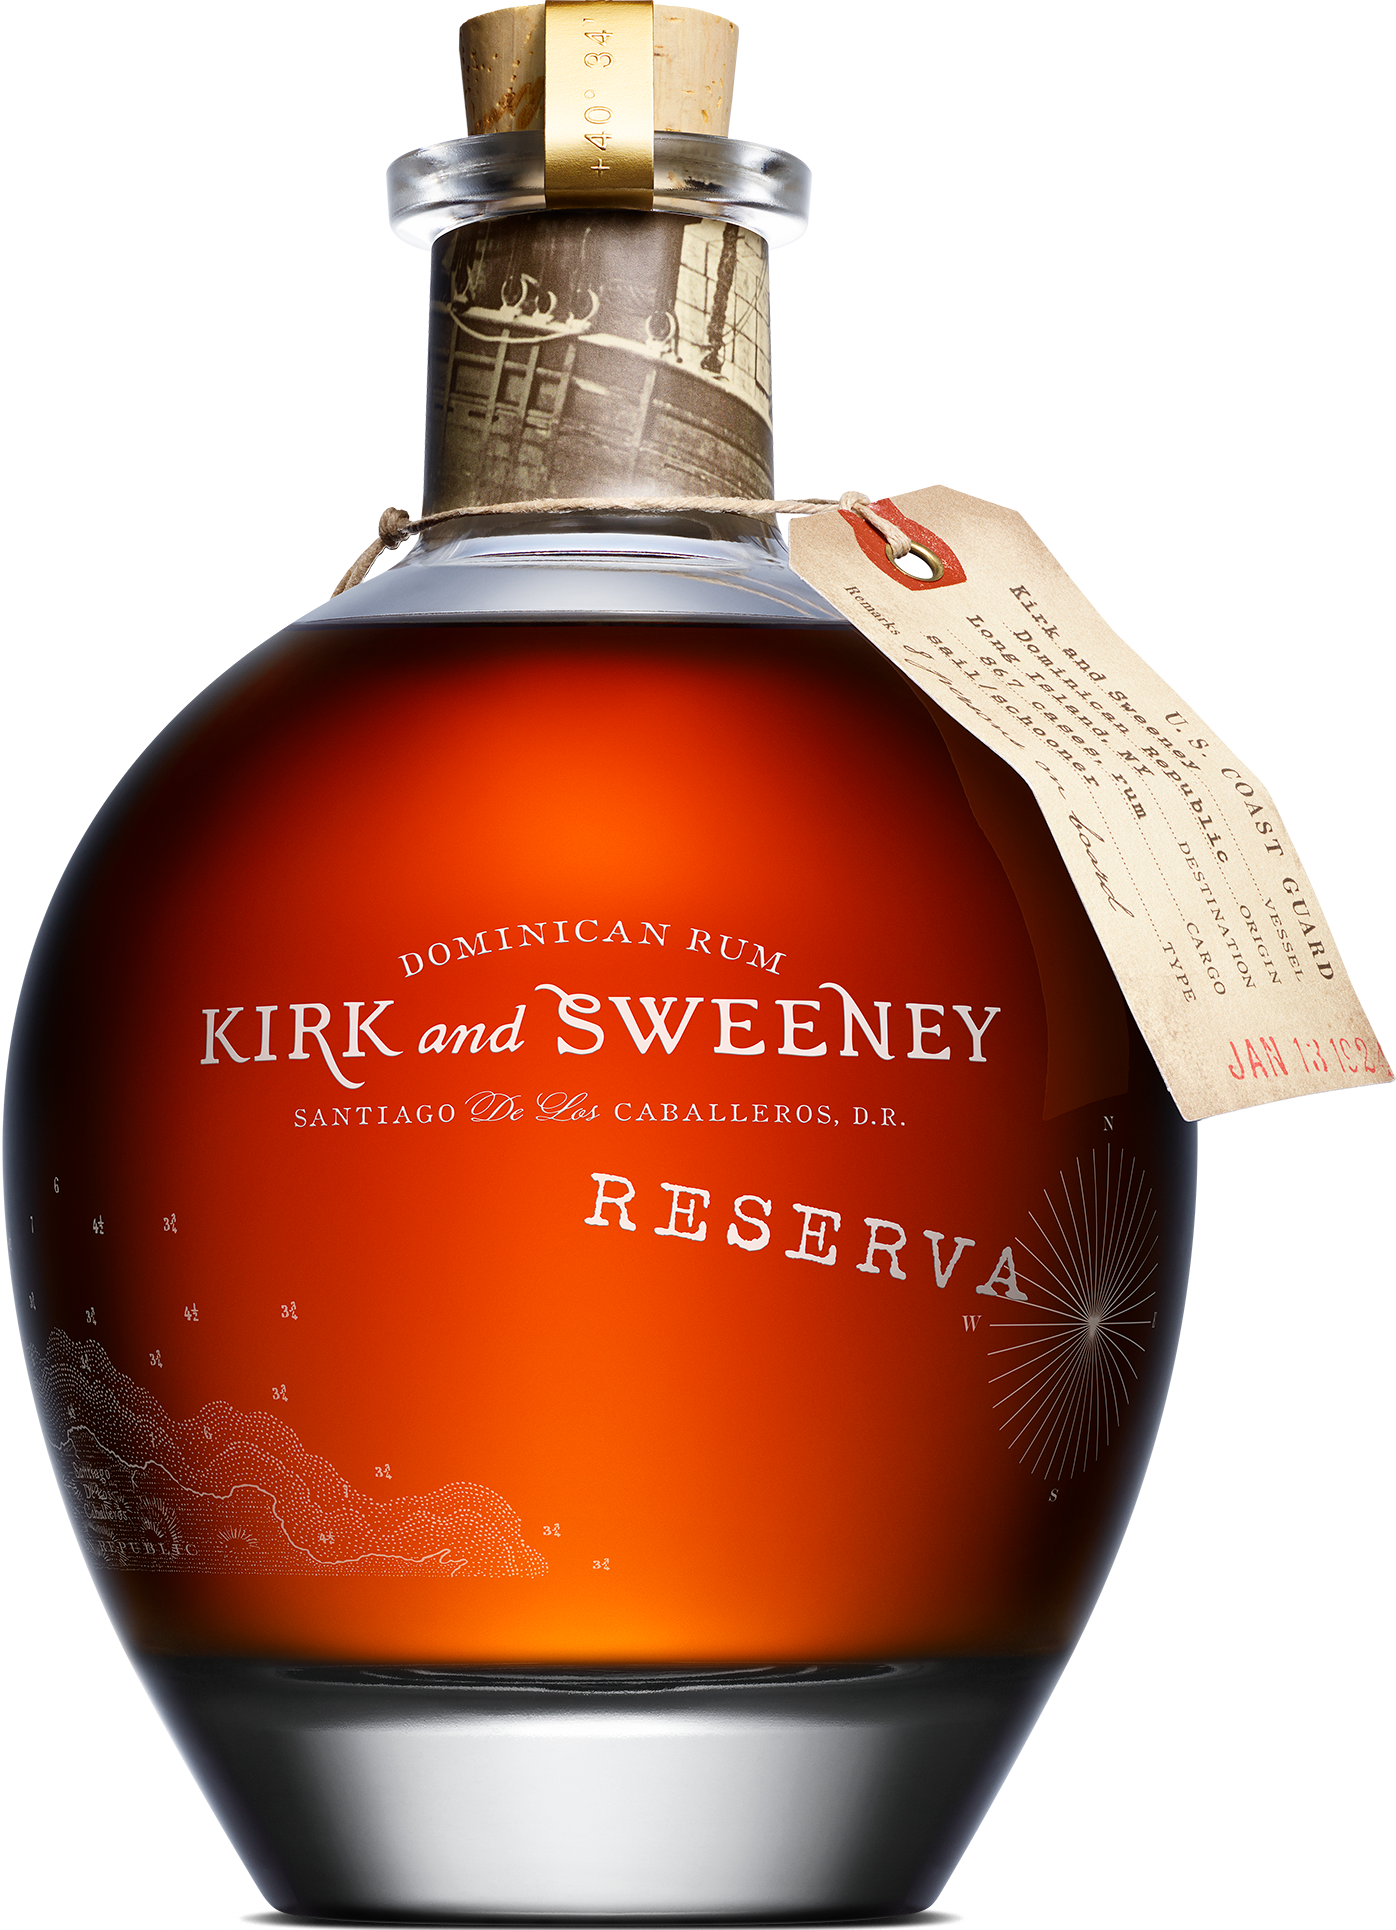 Kirk and Sweeney Reserva Blended Dominican Rum 40% 0,7l